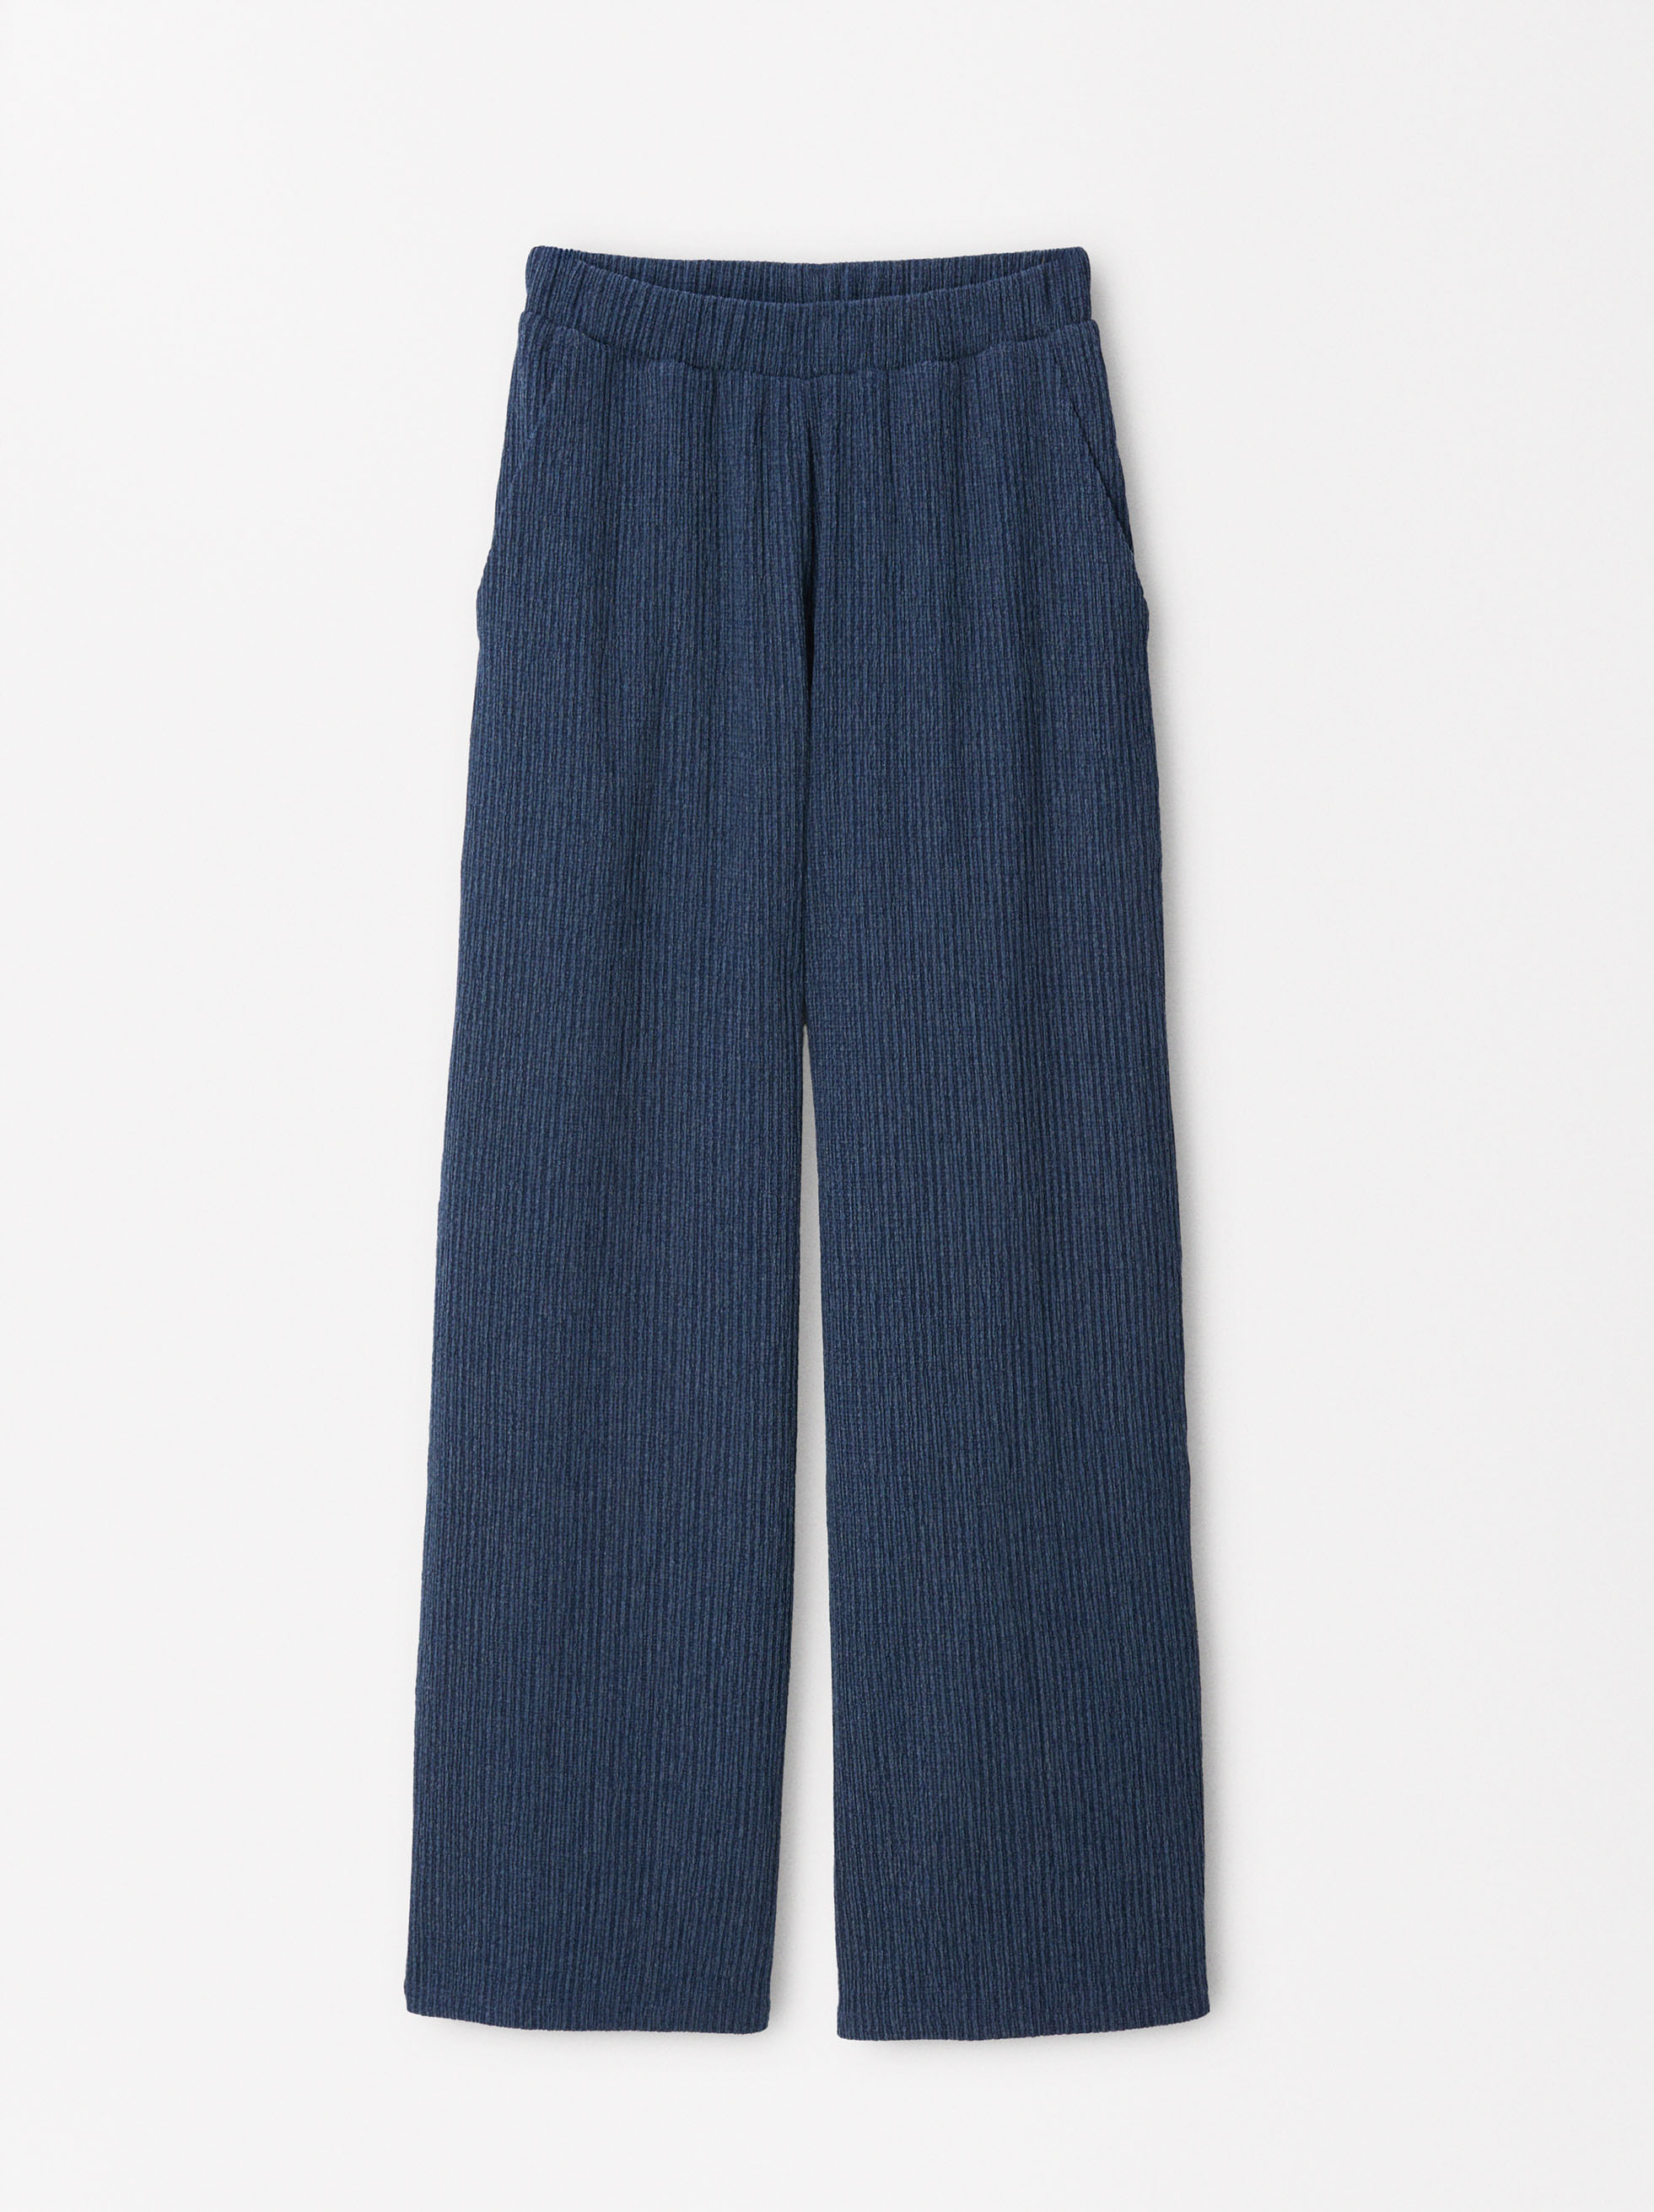 Textured Pants With Elastic Waistband image number 0.0